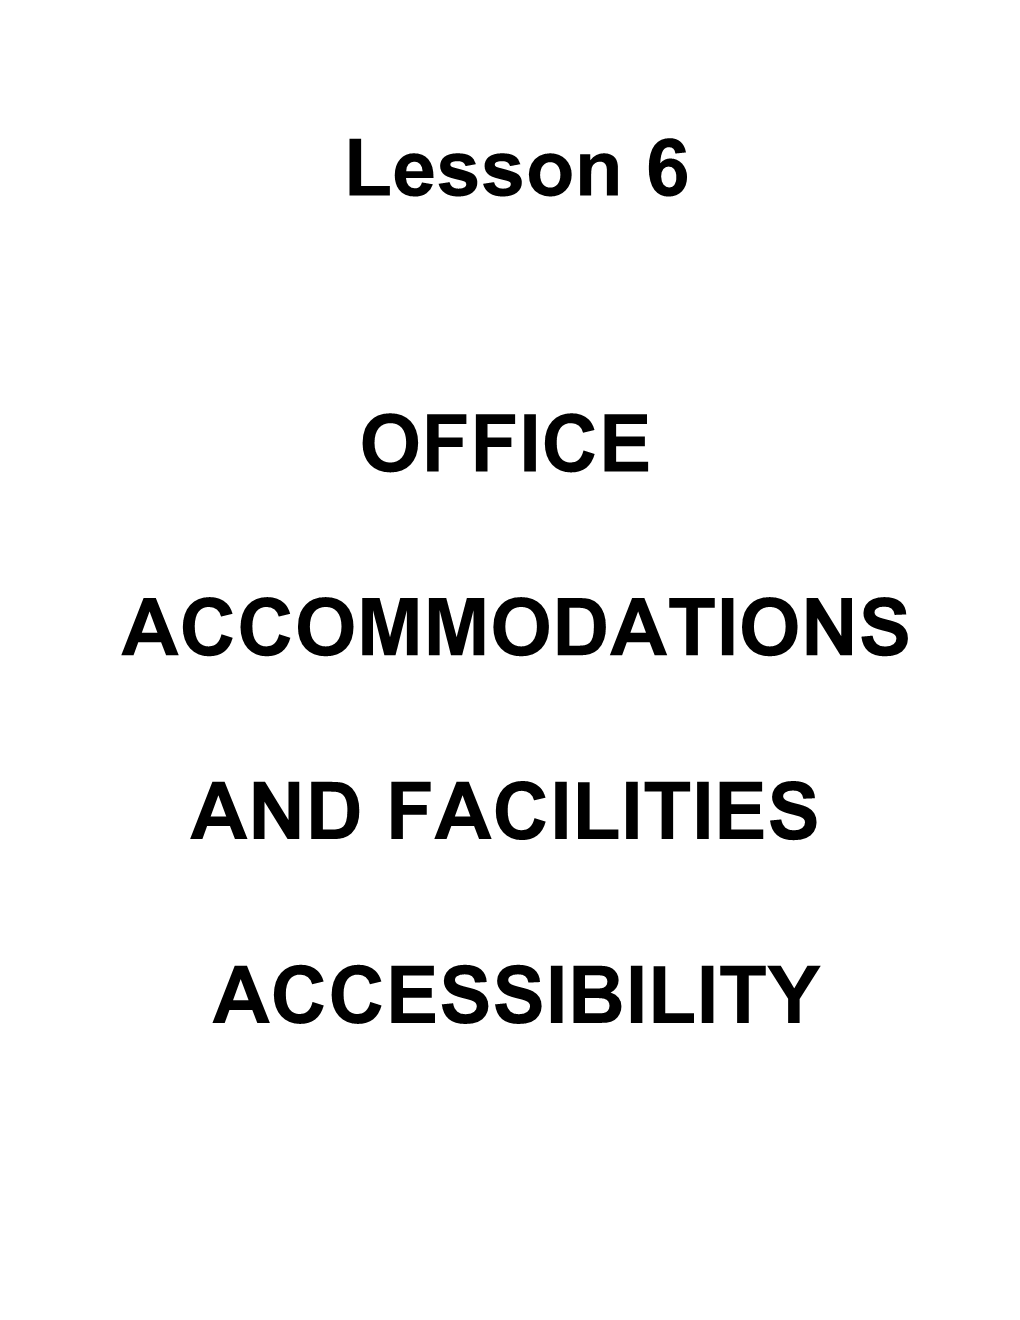 Issue: Office Accommodation and Facilities Accessibility